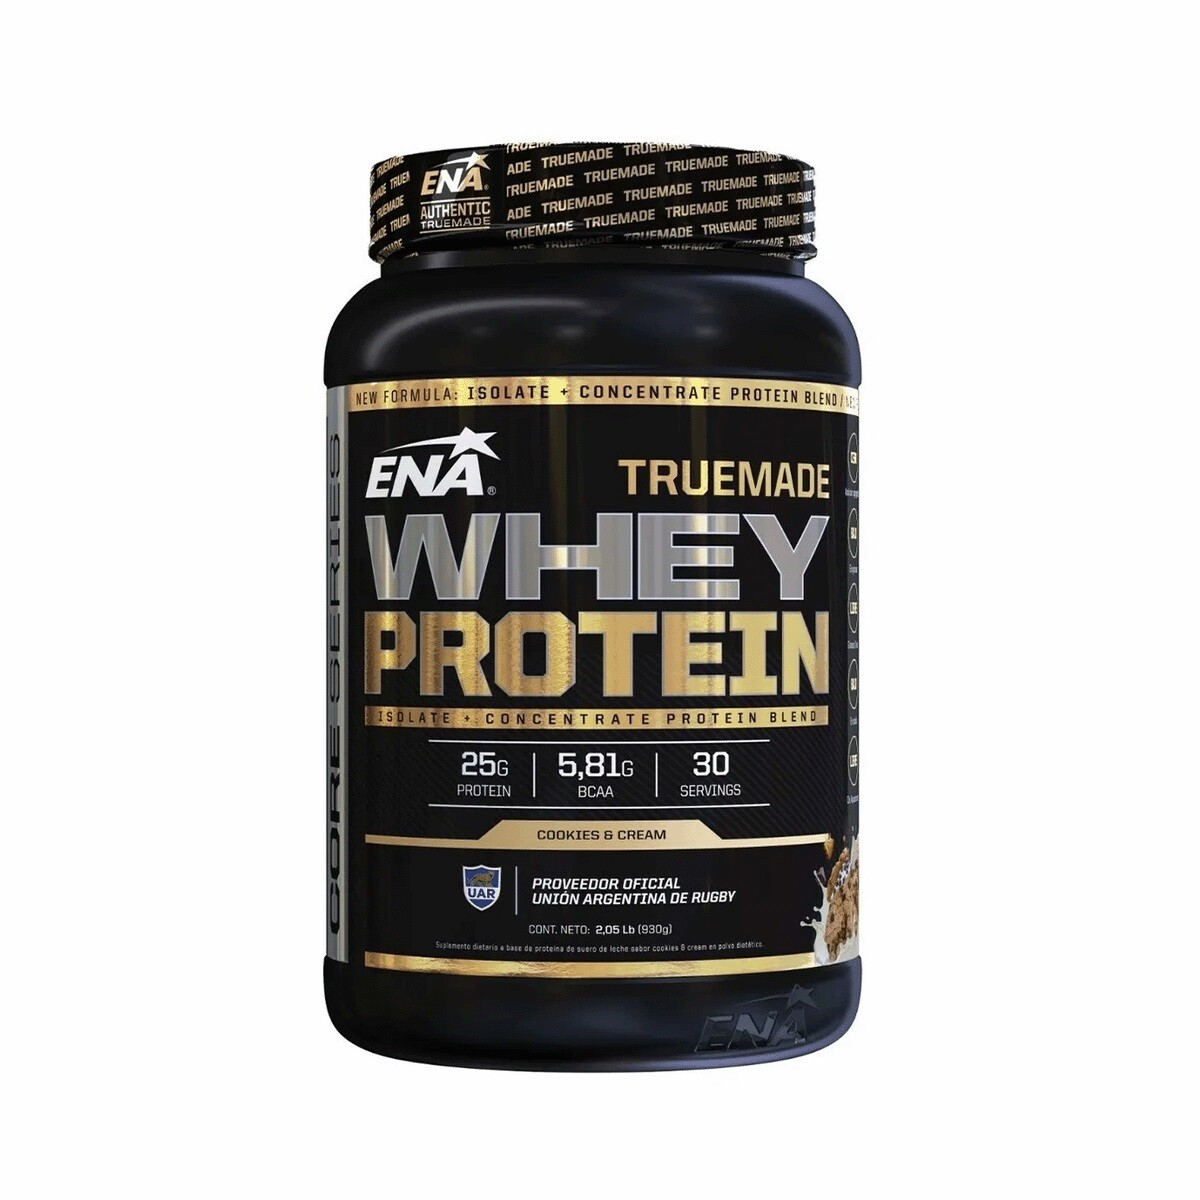 ENA Whey Protein True Made 2lb - Cookies & Cream 